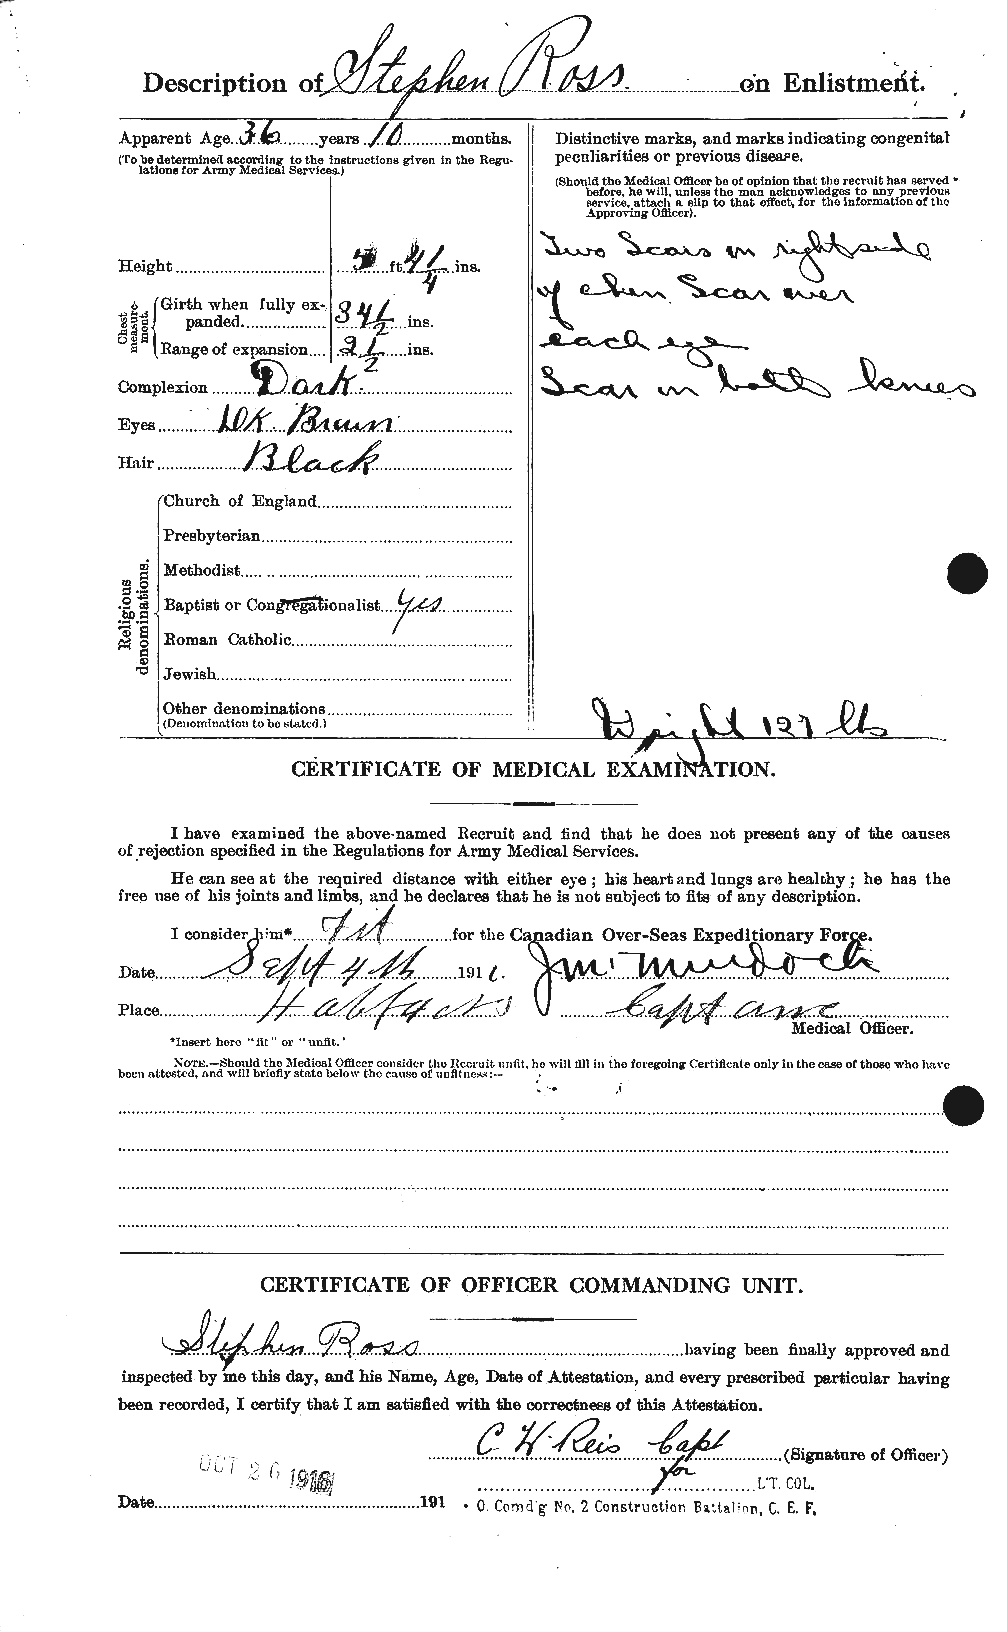 Personnel Records of the First World War - CEF 614032b